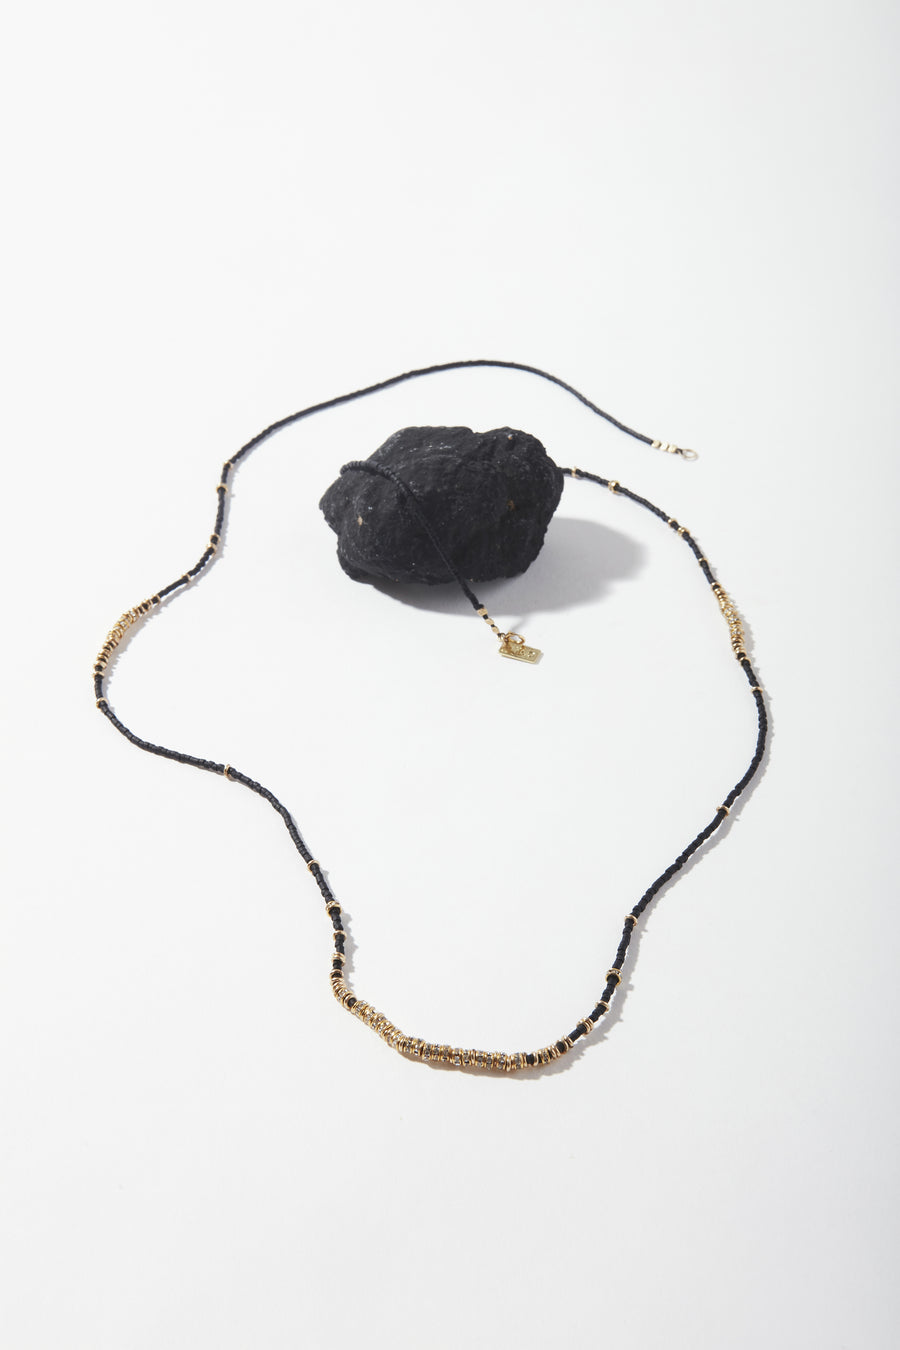 Lune Noir Crystals Long Full Necklace